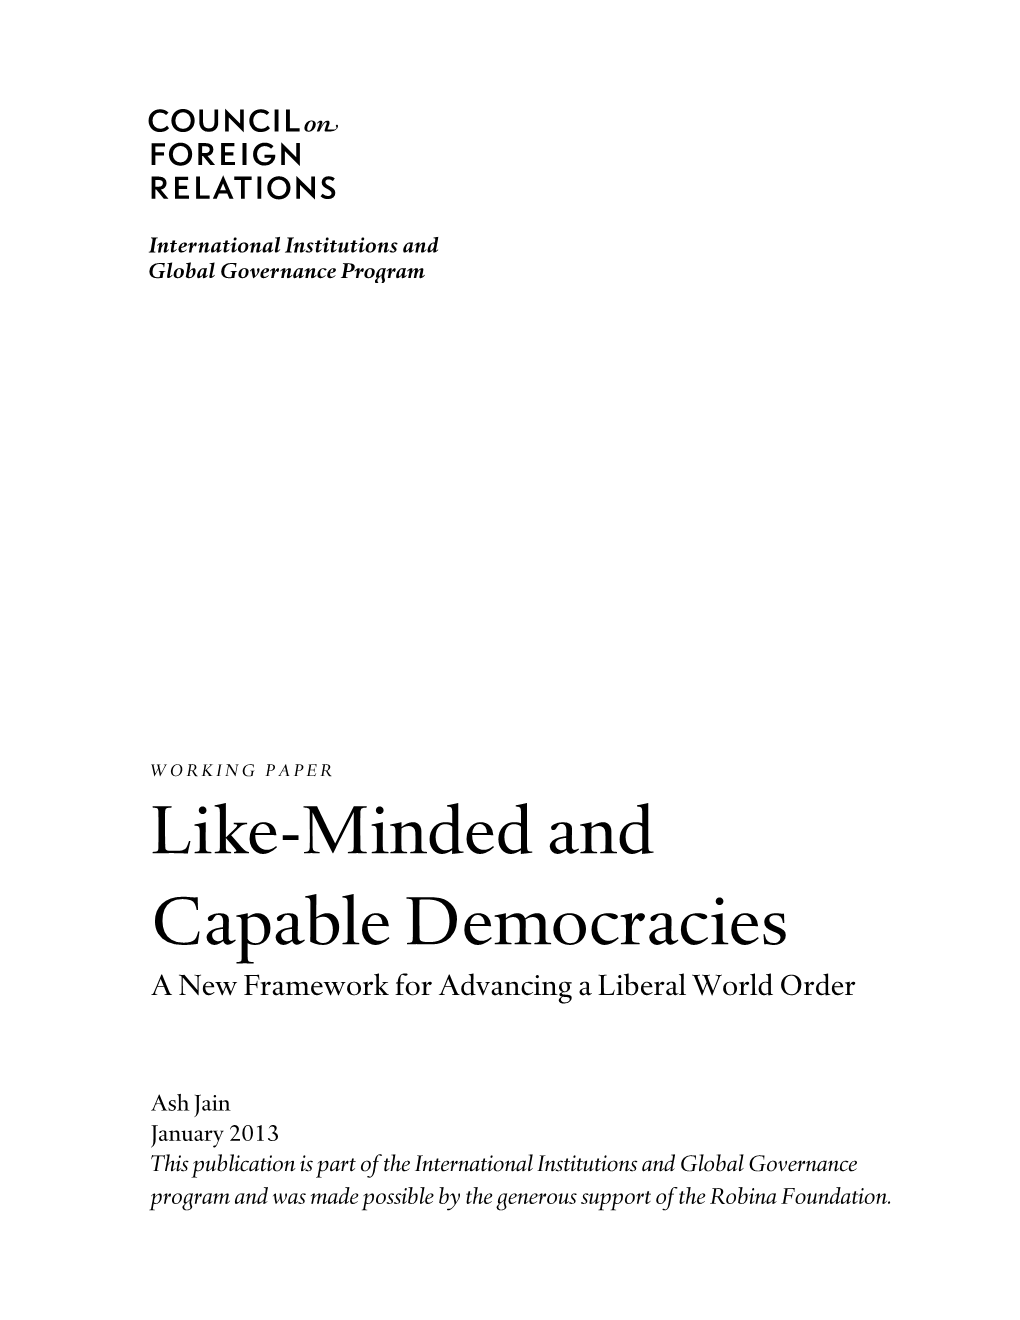 Like-Minded and Capable Democracies a New Framework for Advancing a Liberal World Order